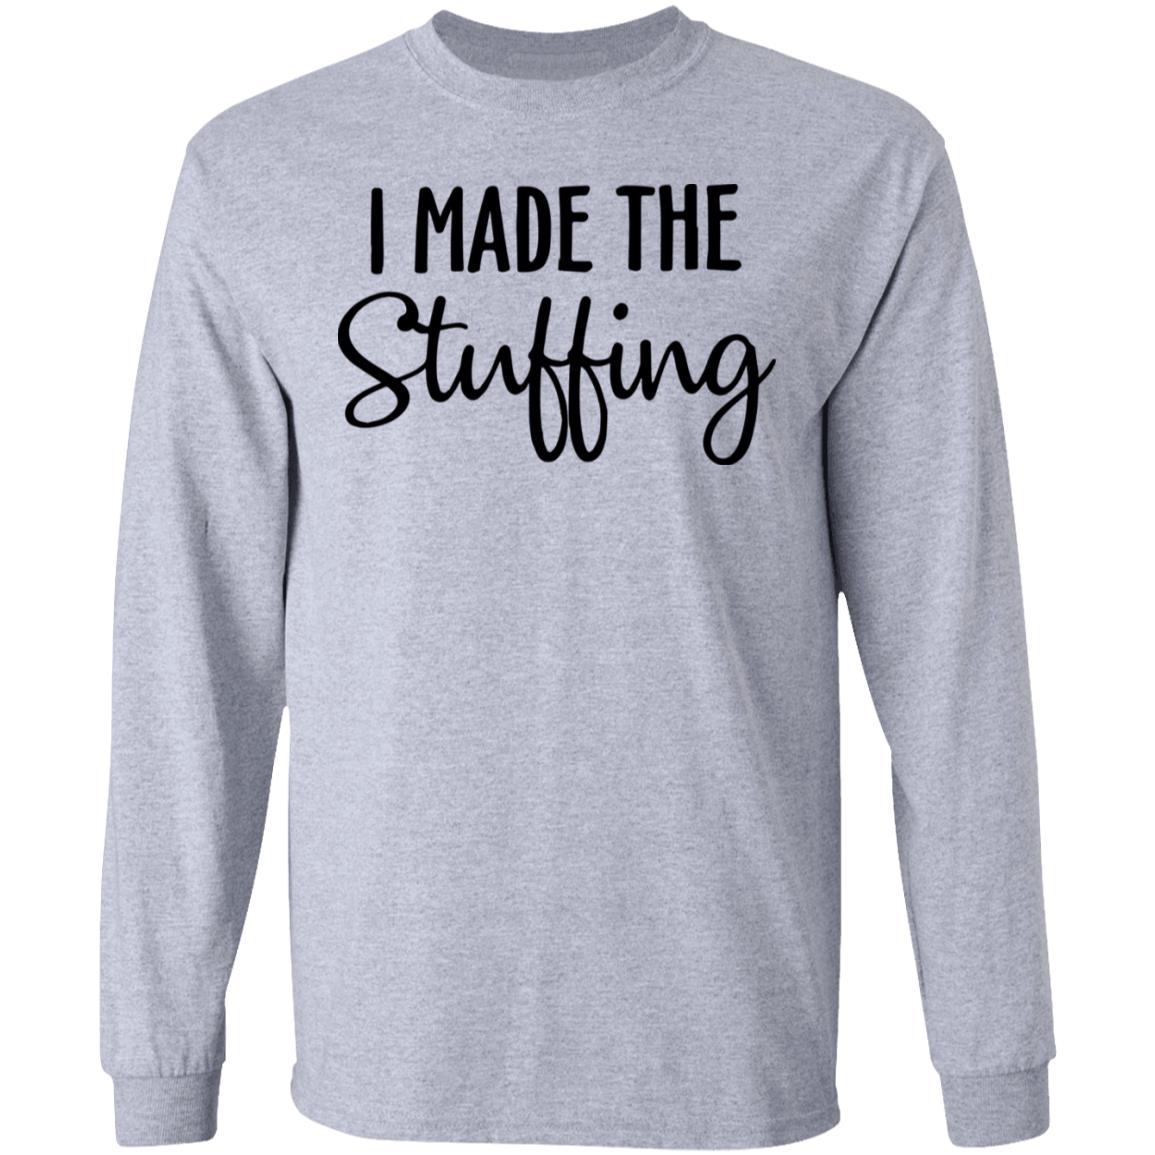 I made the stuffing shirt - Rockatee